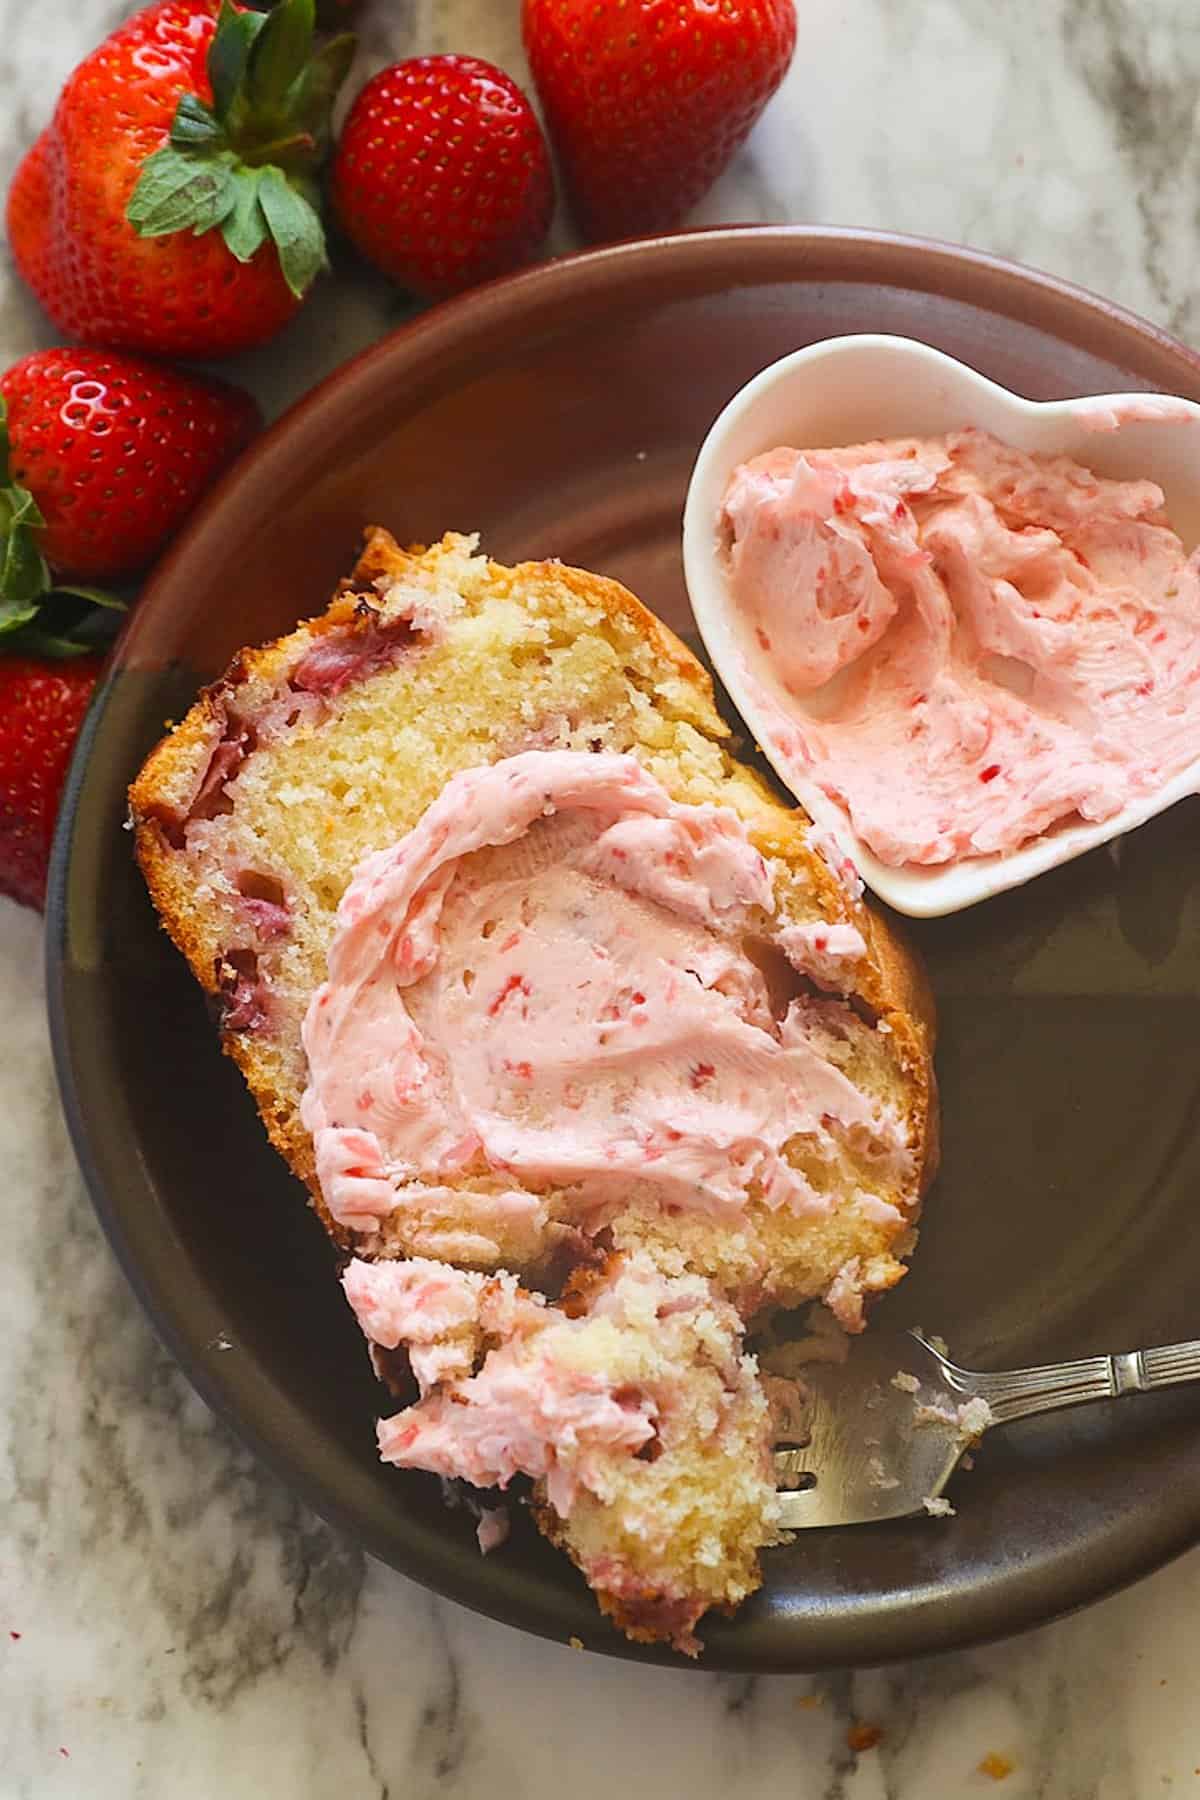 Spreading delectable strawberry butter on insanely delicious strawberry bread